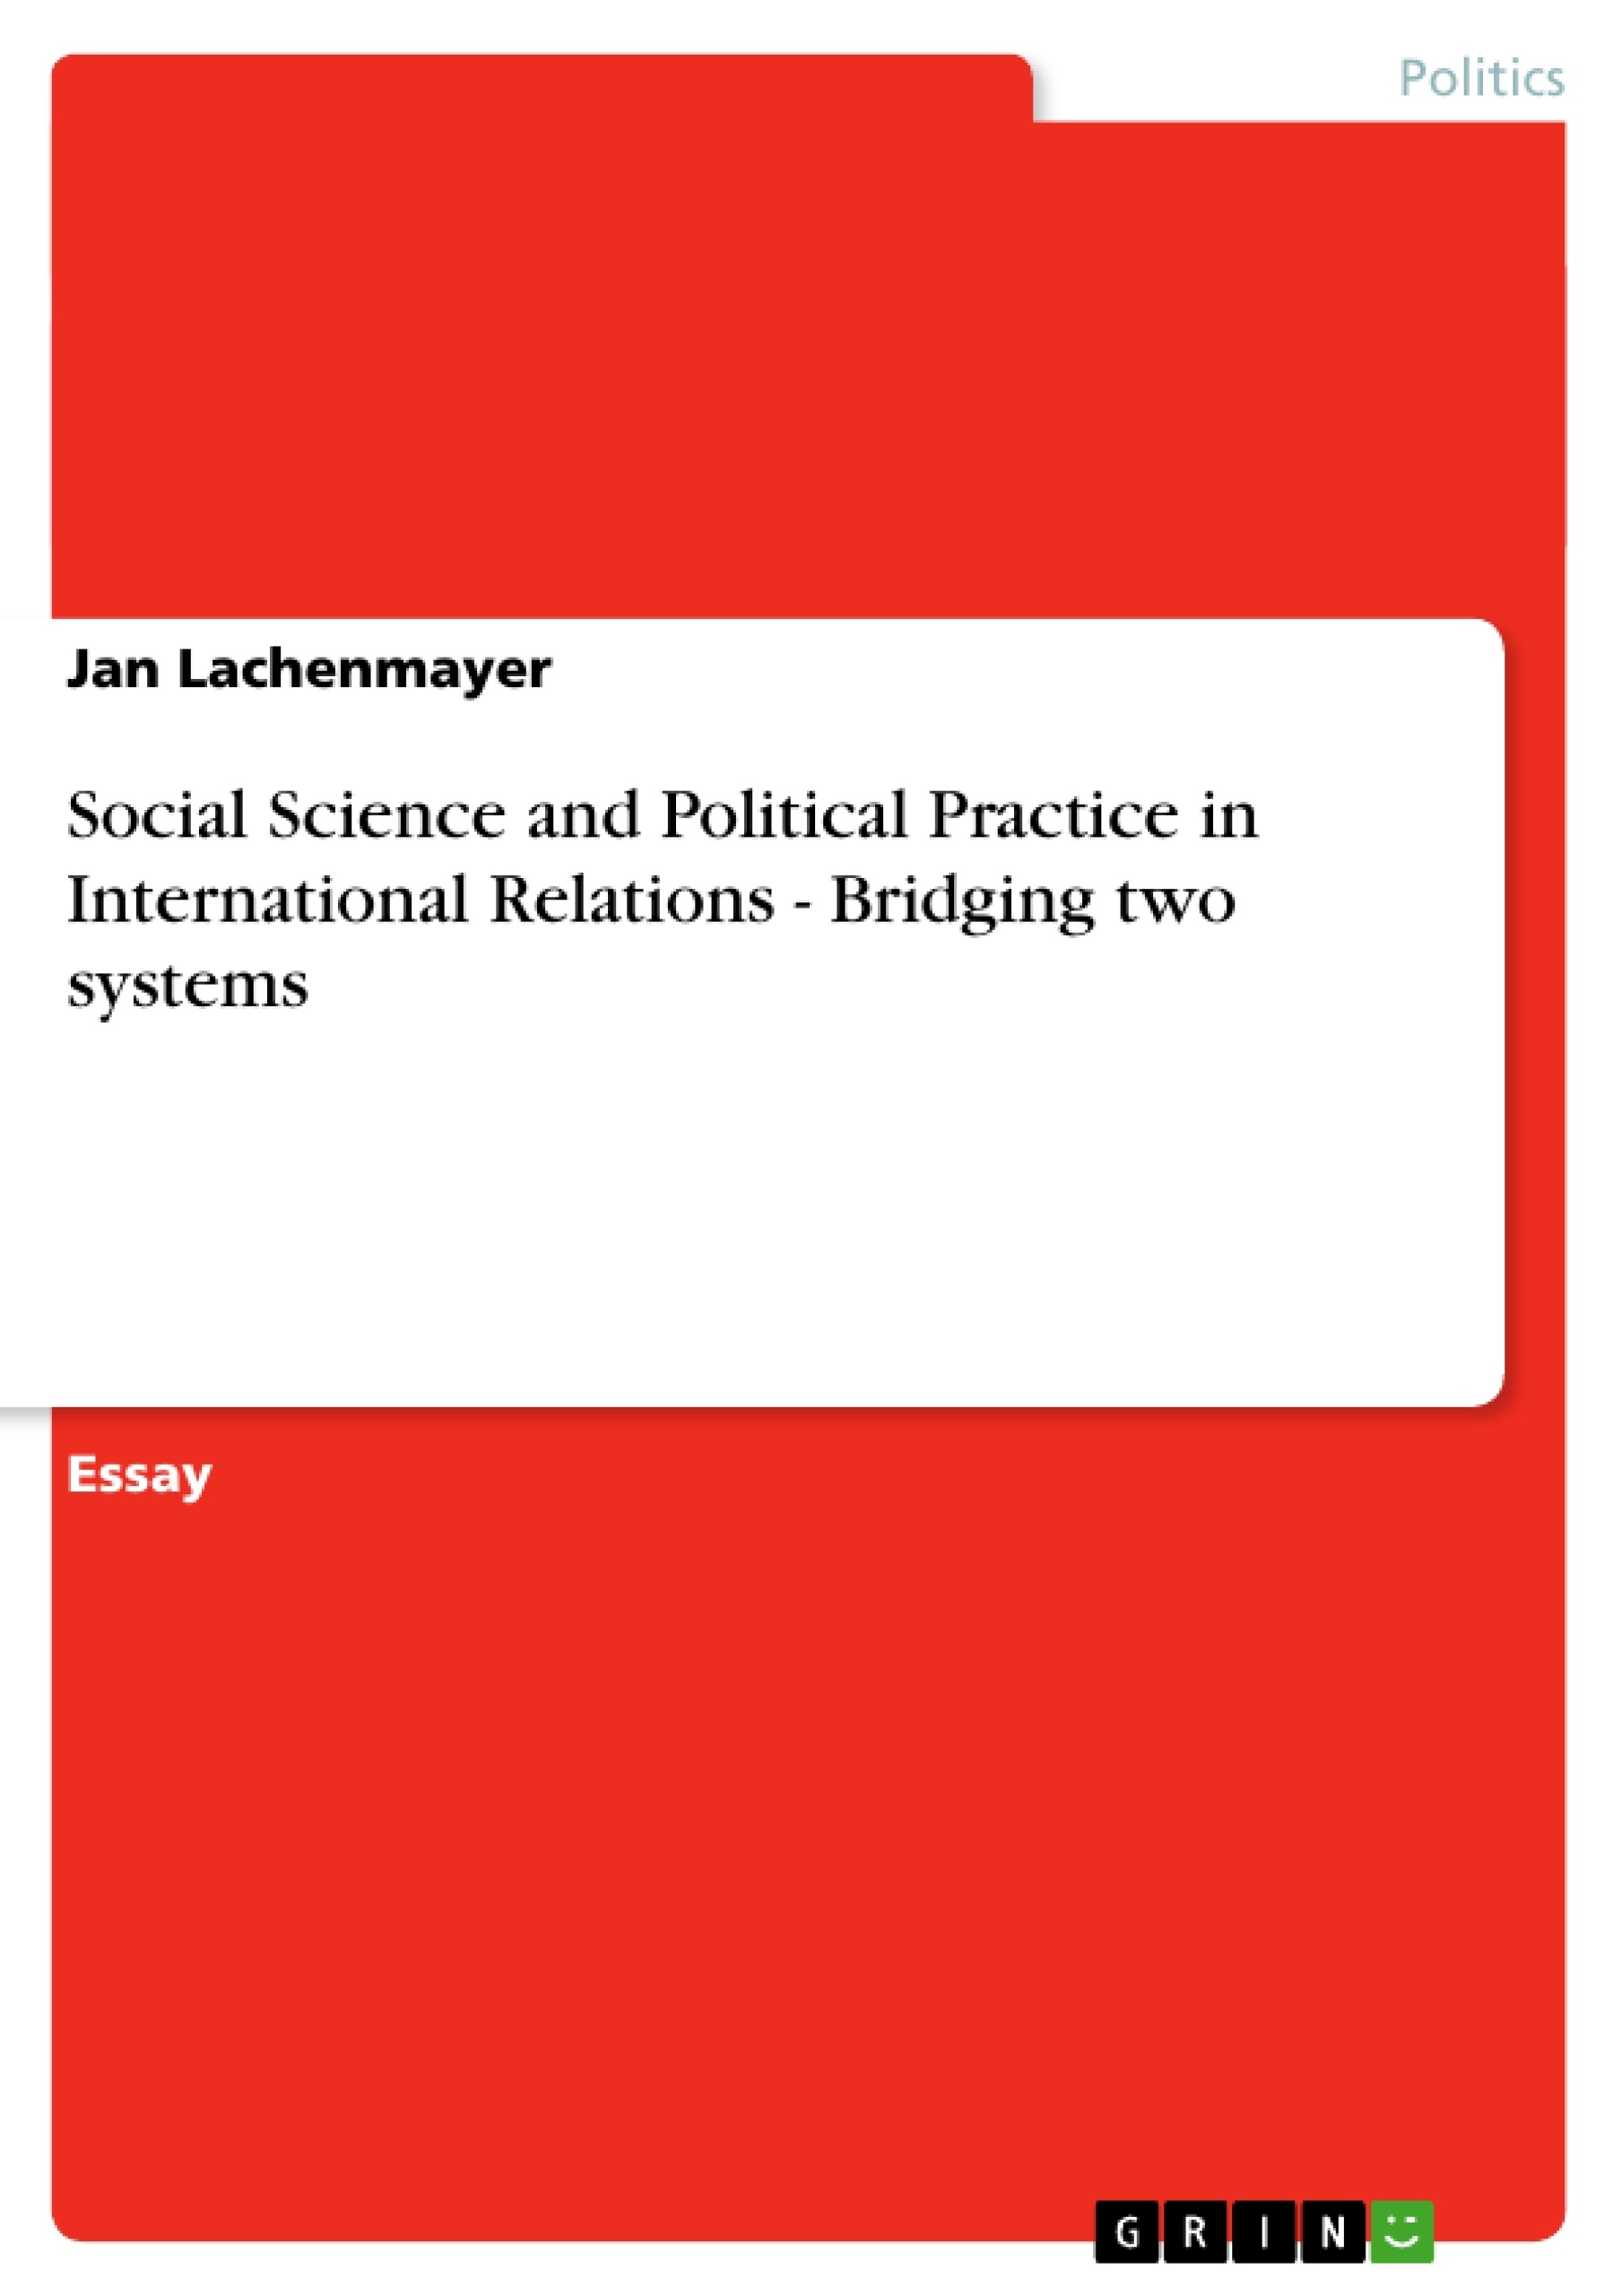 Title: Social Science and Political Practice in International Relations  -  Bridging two systems